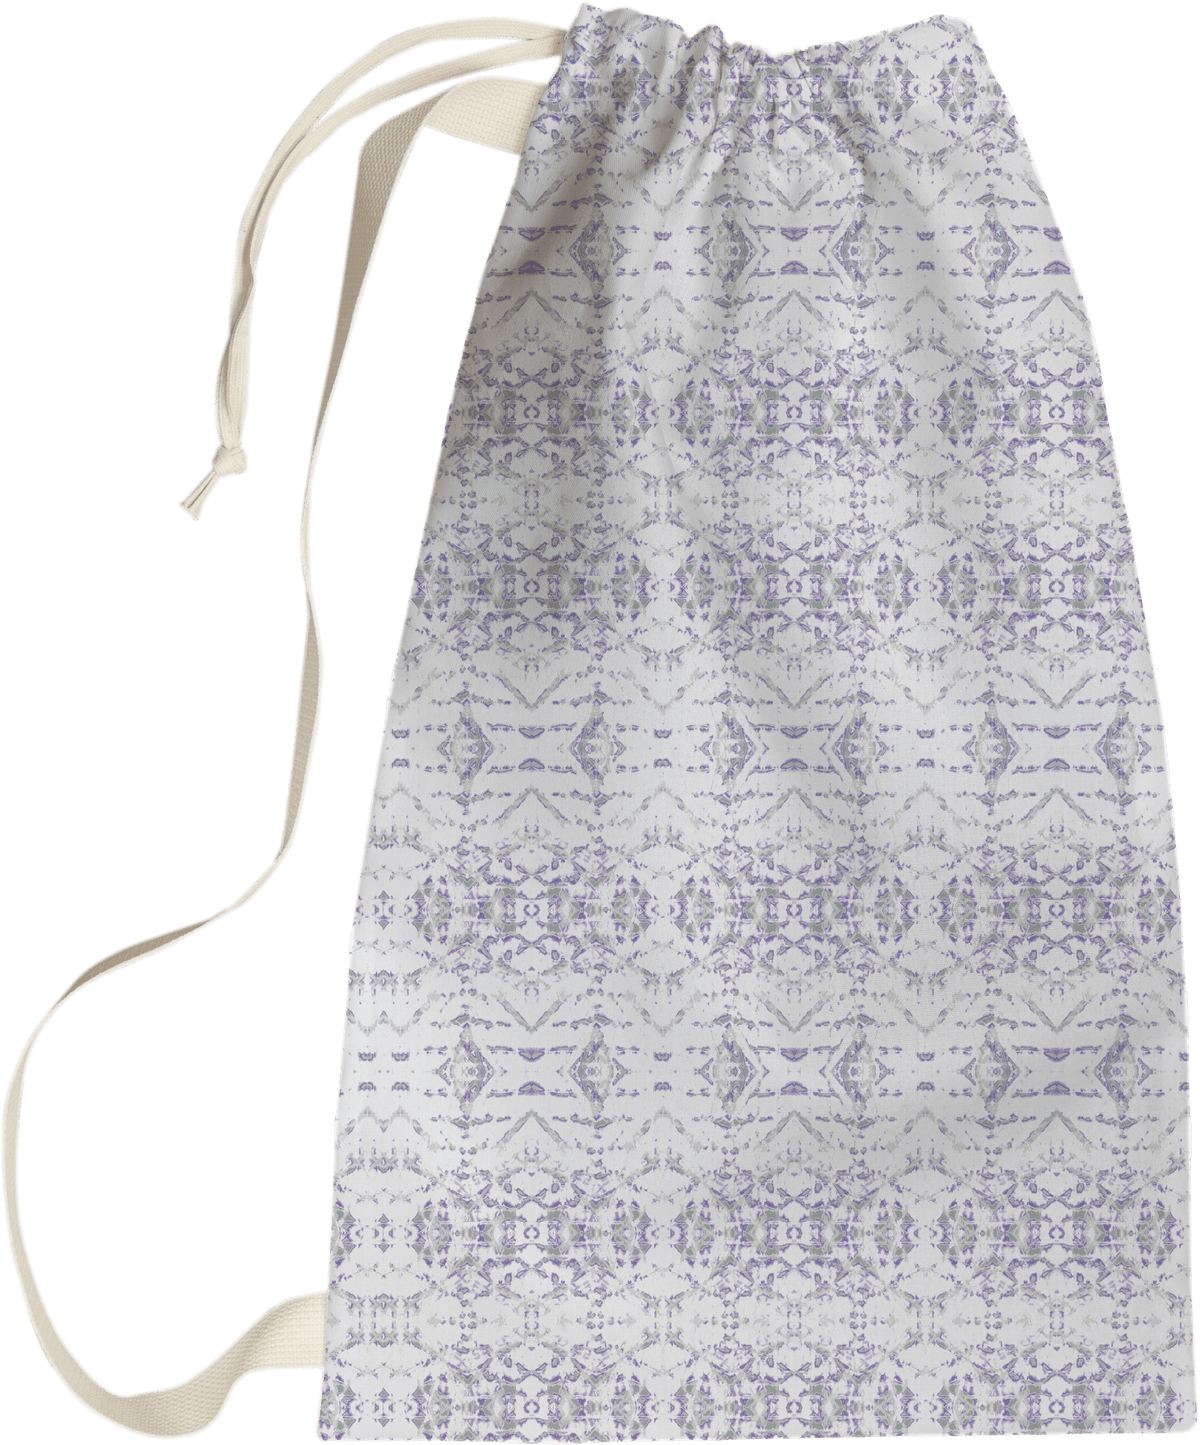 Laundry Bag - Kimi Grey Room Accessories, Laundry Bags MWW 